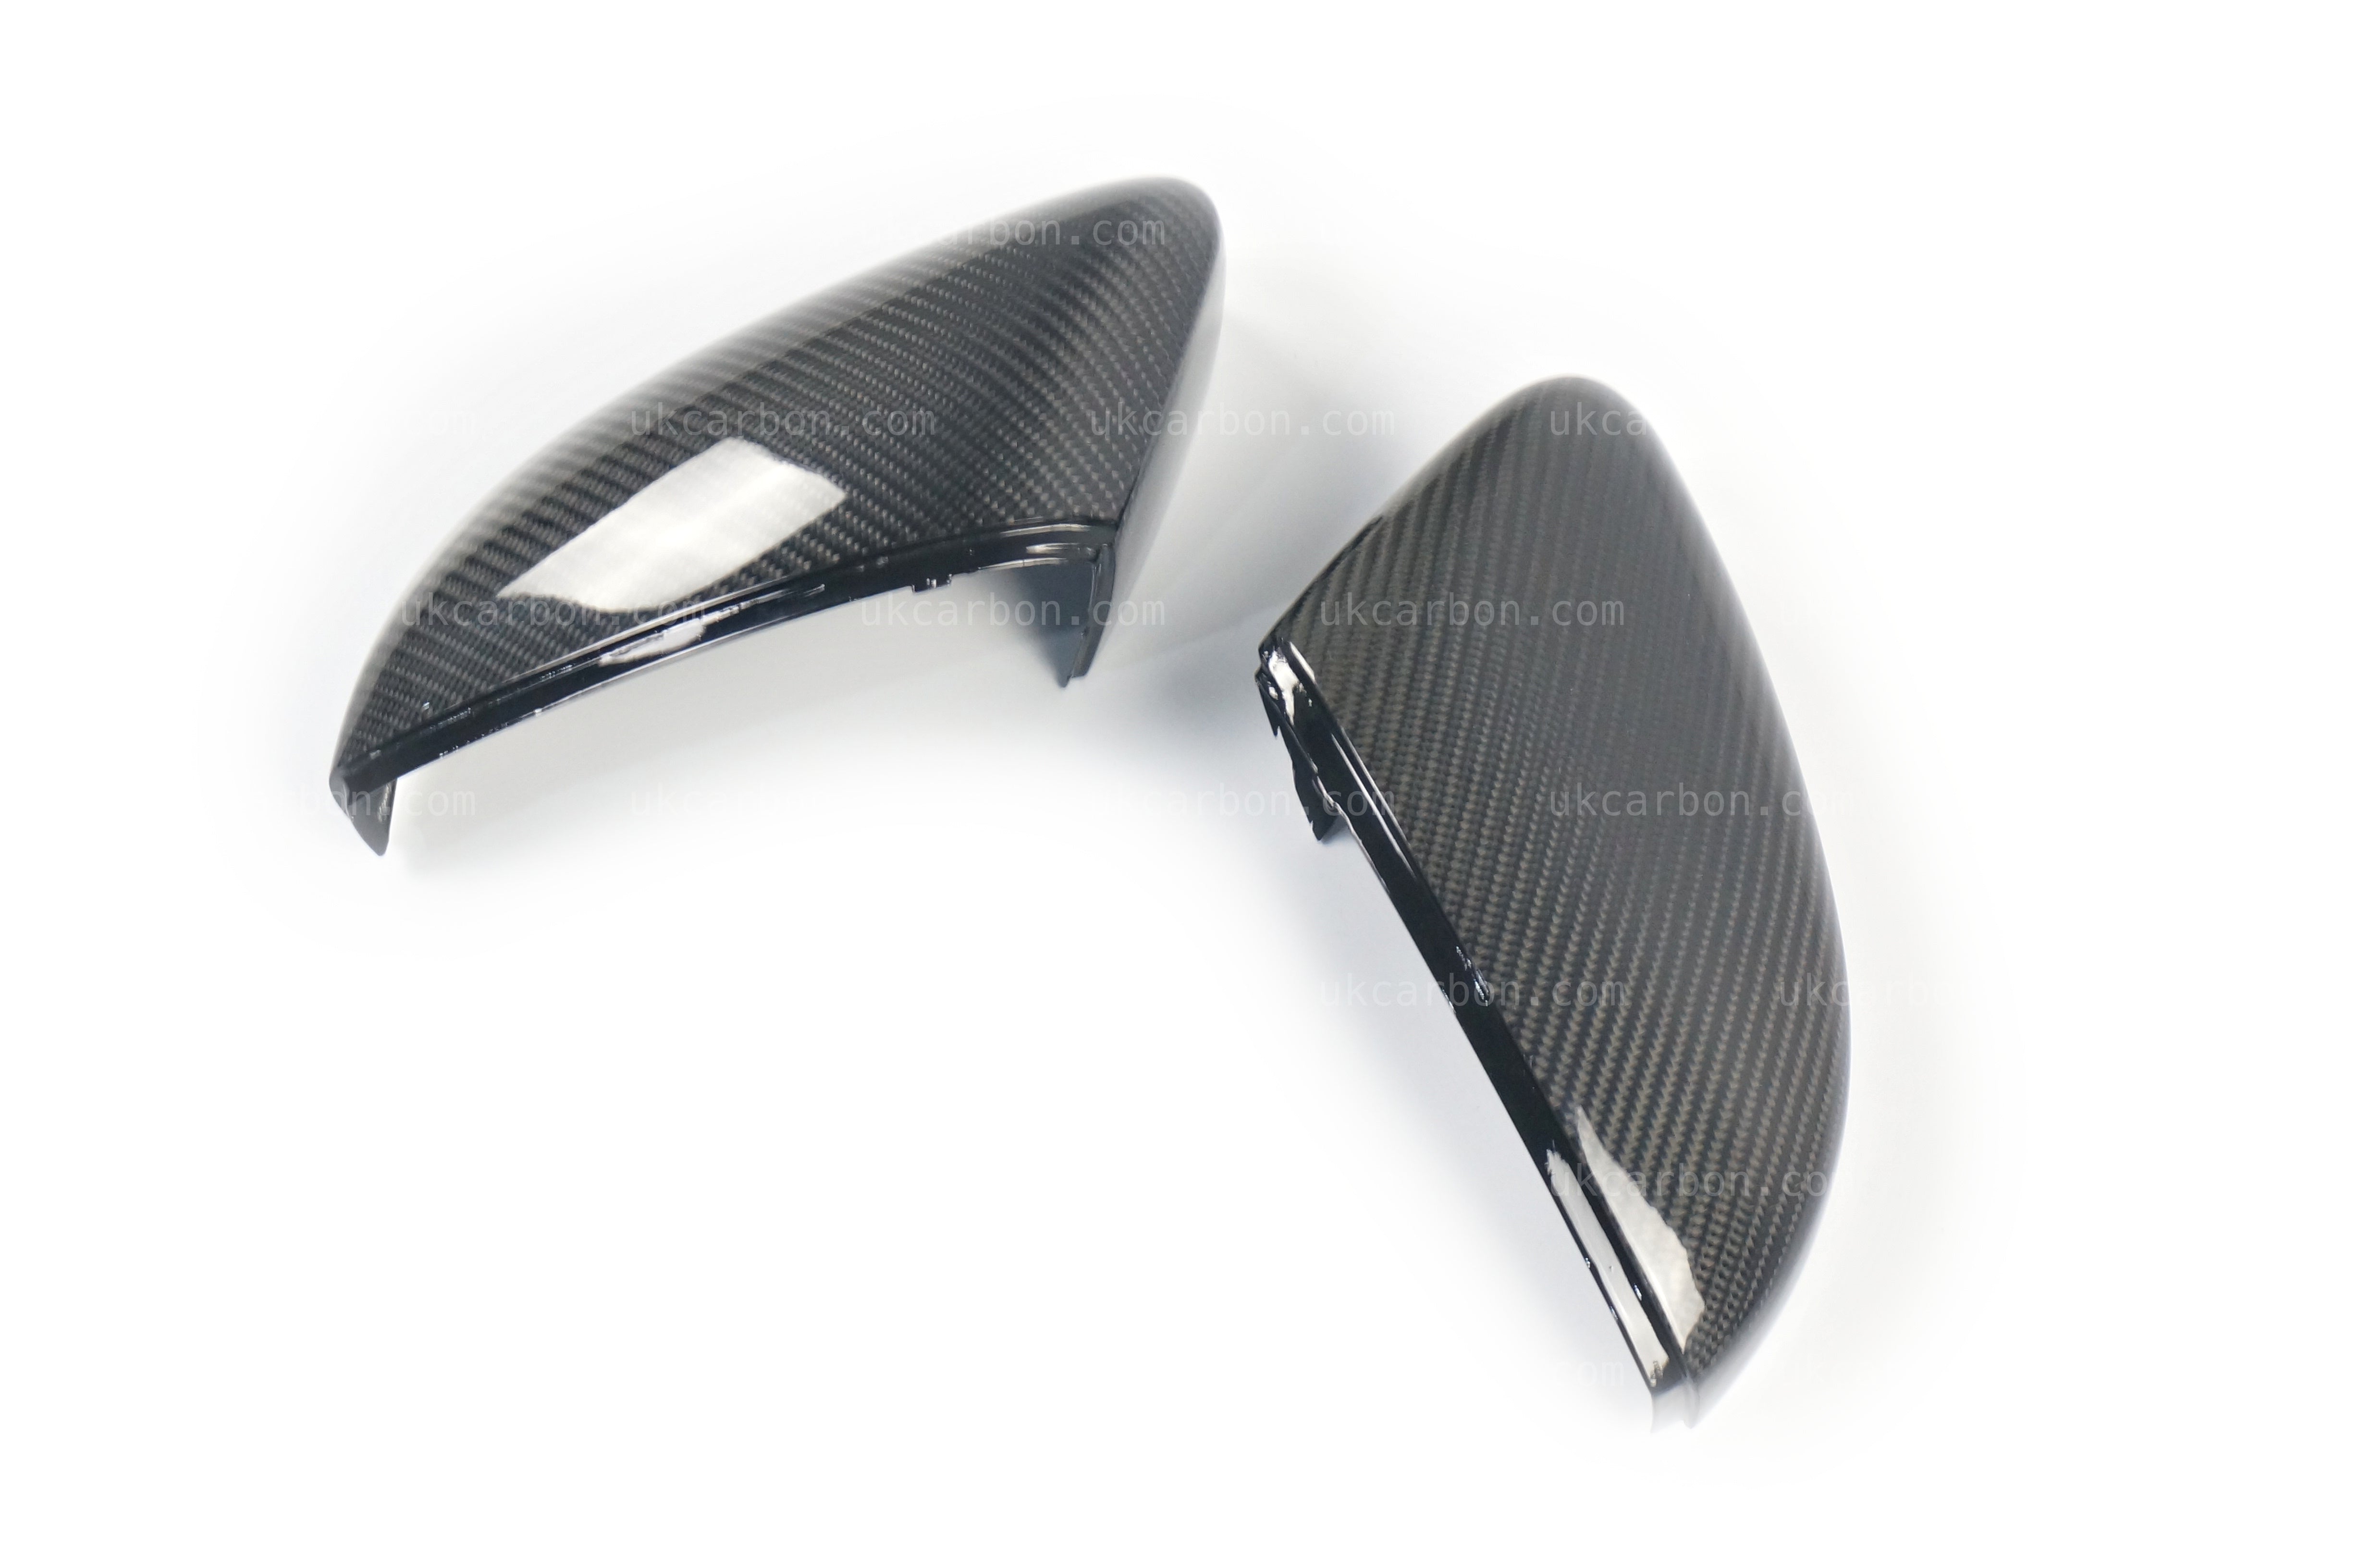 Volkswagen VW Polo Carbon Fibre Wing Mirror Cover Replacements 6R 6C by UKCarbon